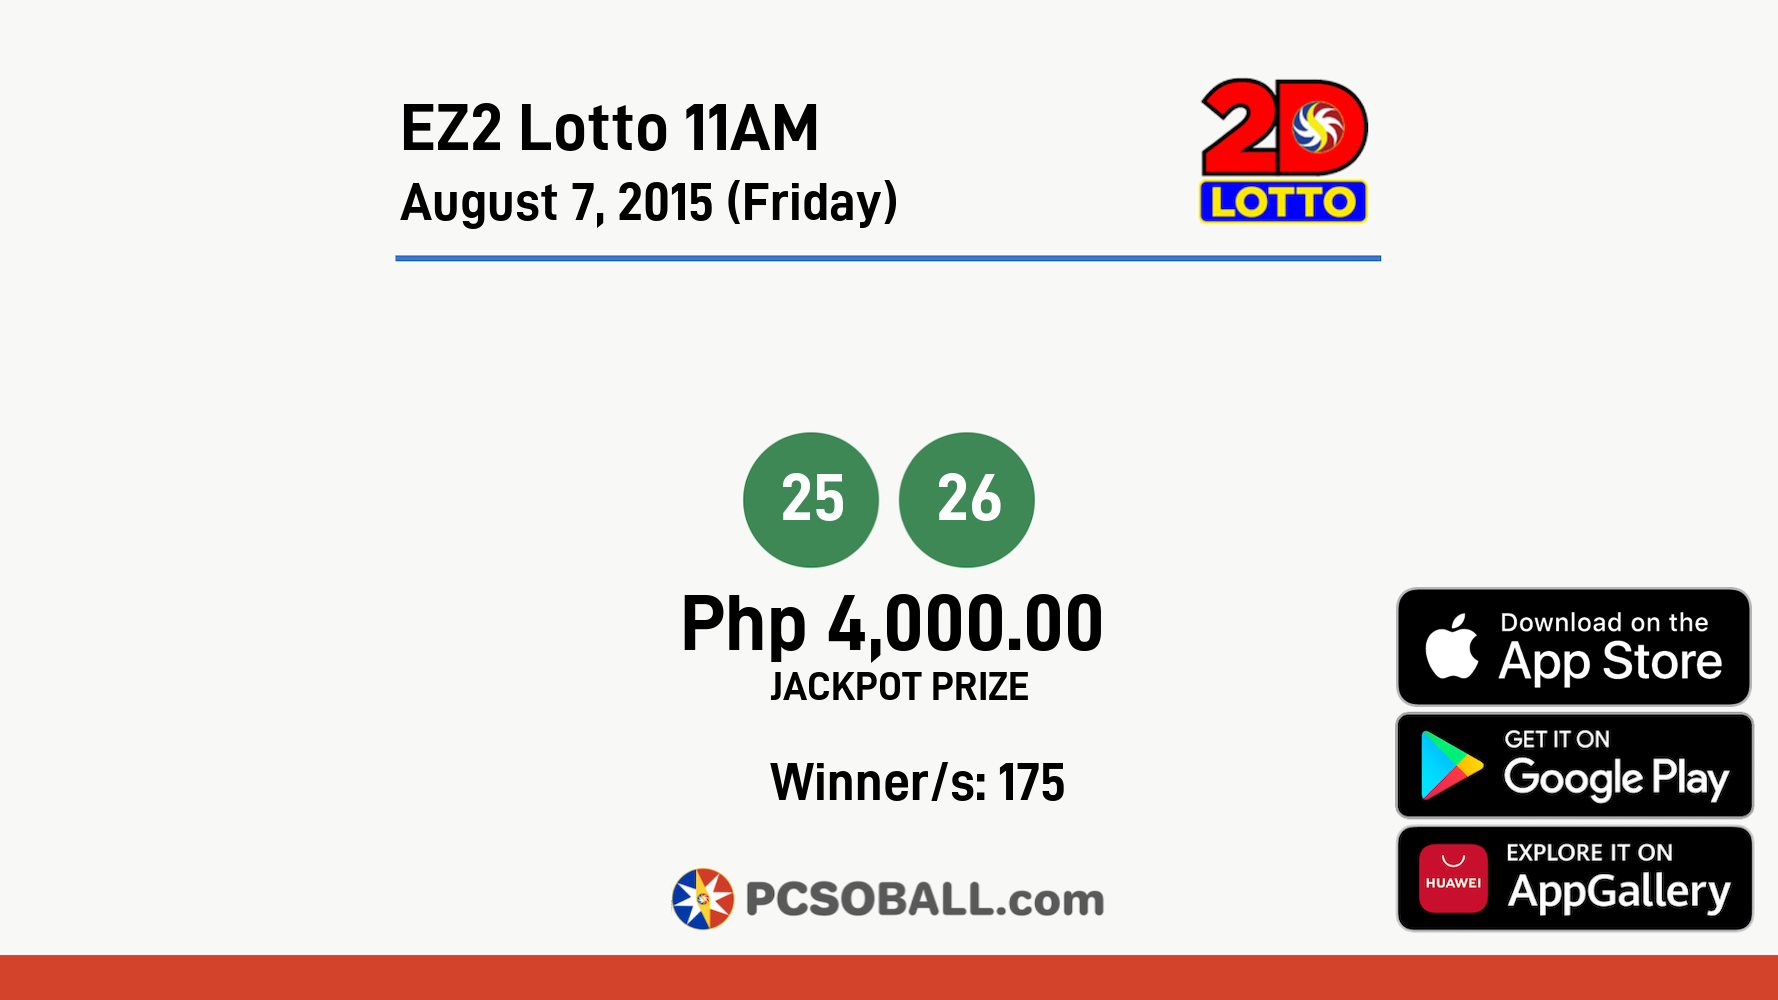 EZ2 Lotto 11AM August 7, 2015 (Friday) Result